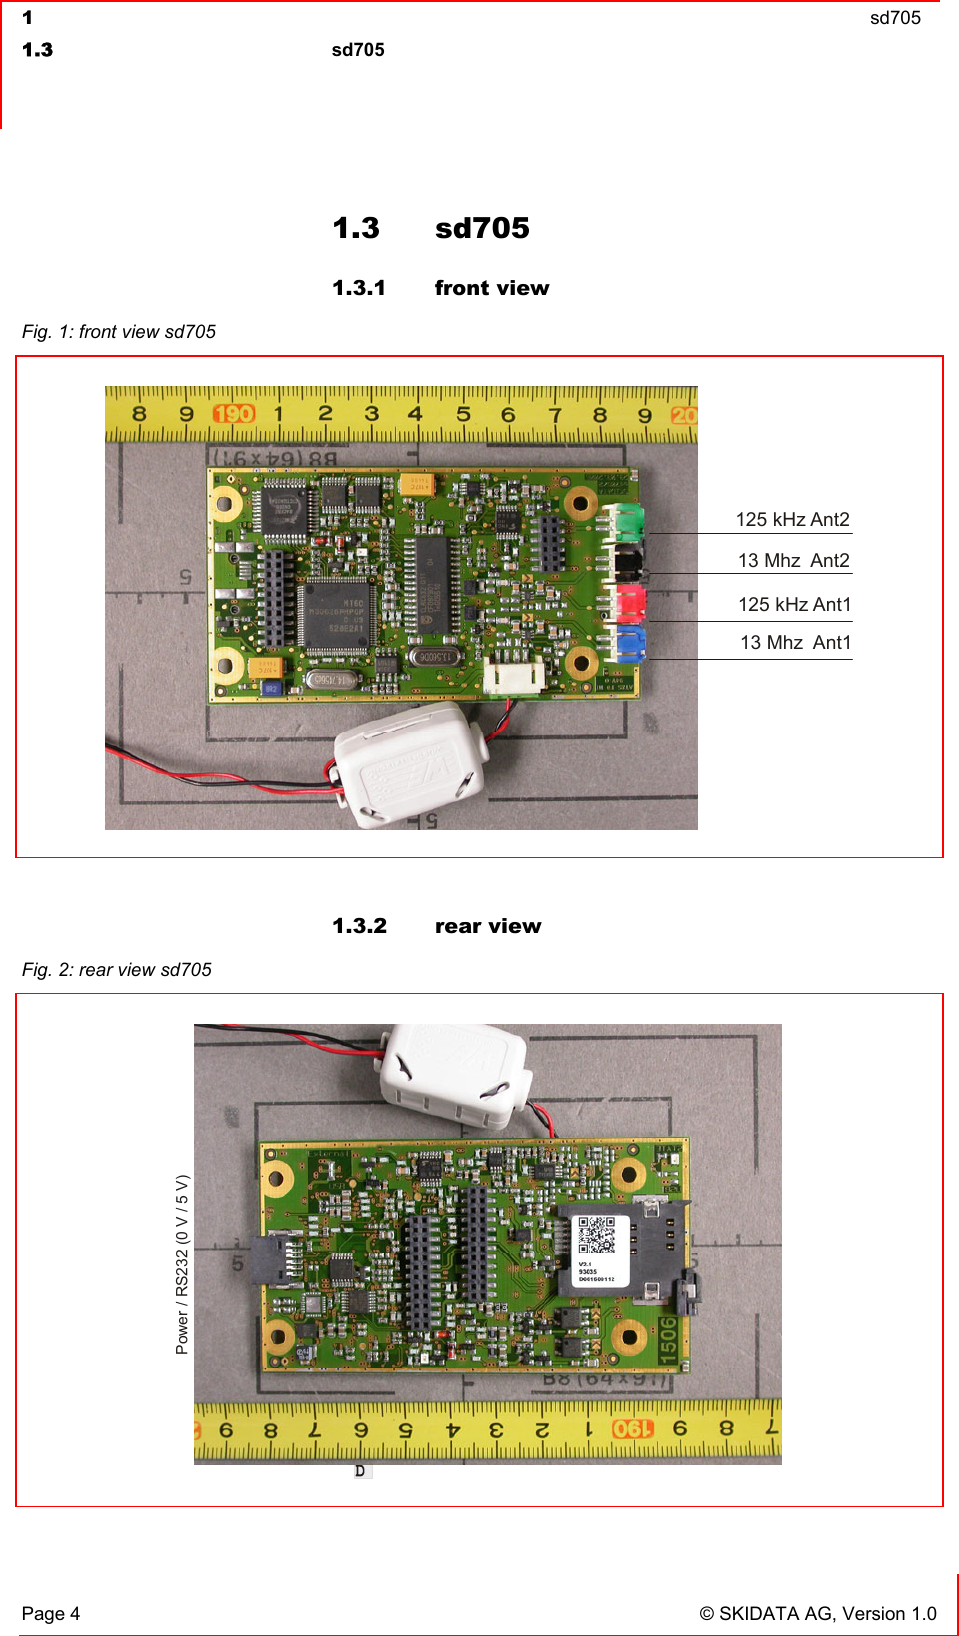  1  sd705  1.3 sd705   Page 4  © SKIDATA AG, Version 1.0 1.3 sd705 1.3.1 front view  1.3.2 rear view Fig. 1: front view sd705  13 Mhz  Ant213 Mhz  Ant1125 kHz Ant1Power / Rs232125 kHz Ant2 Fig. 2: rear view sd705  Power / RS232 (0 V / 5 V) 